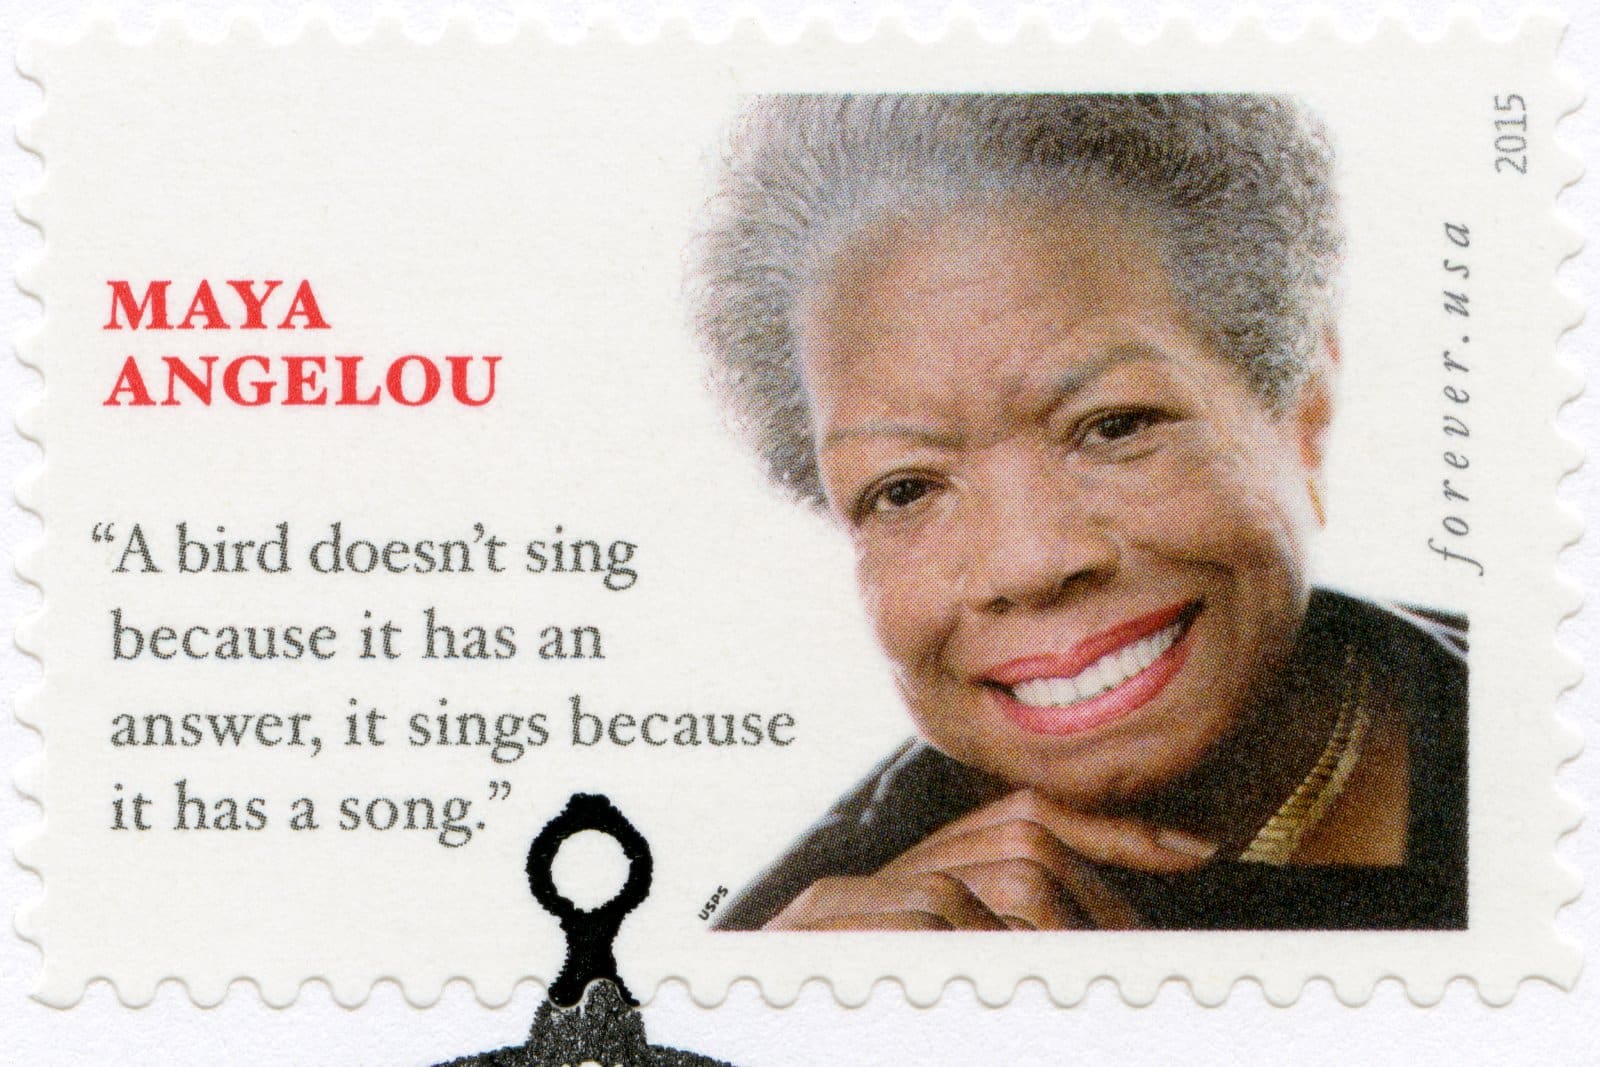 Image Credit: Shutterstock / Olga Popova <p><span>Through her poignant writings and powerful voice, Angelou celebrated Black culture and advocated for civil rights, leaving an indelible mark on literature and society.</span></p>